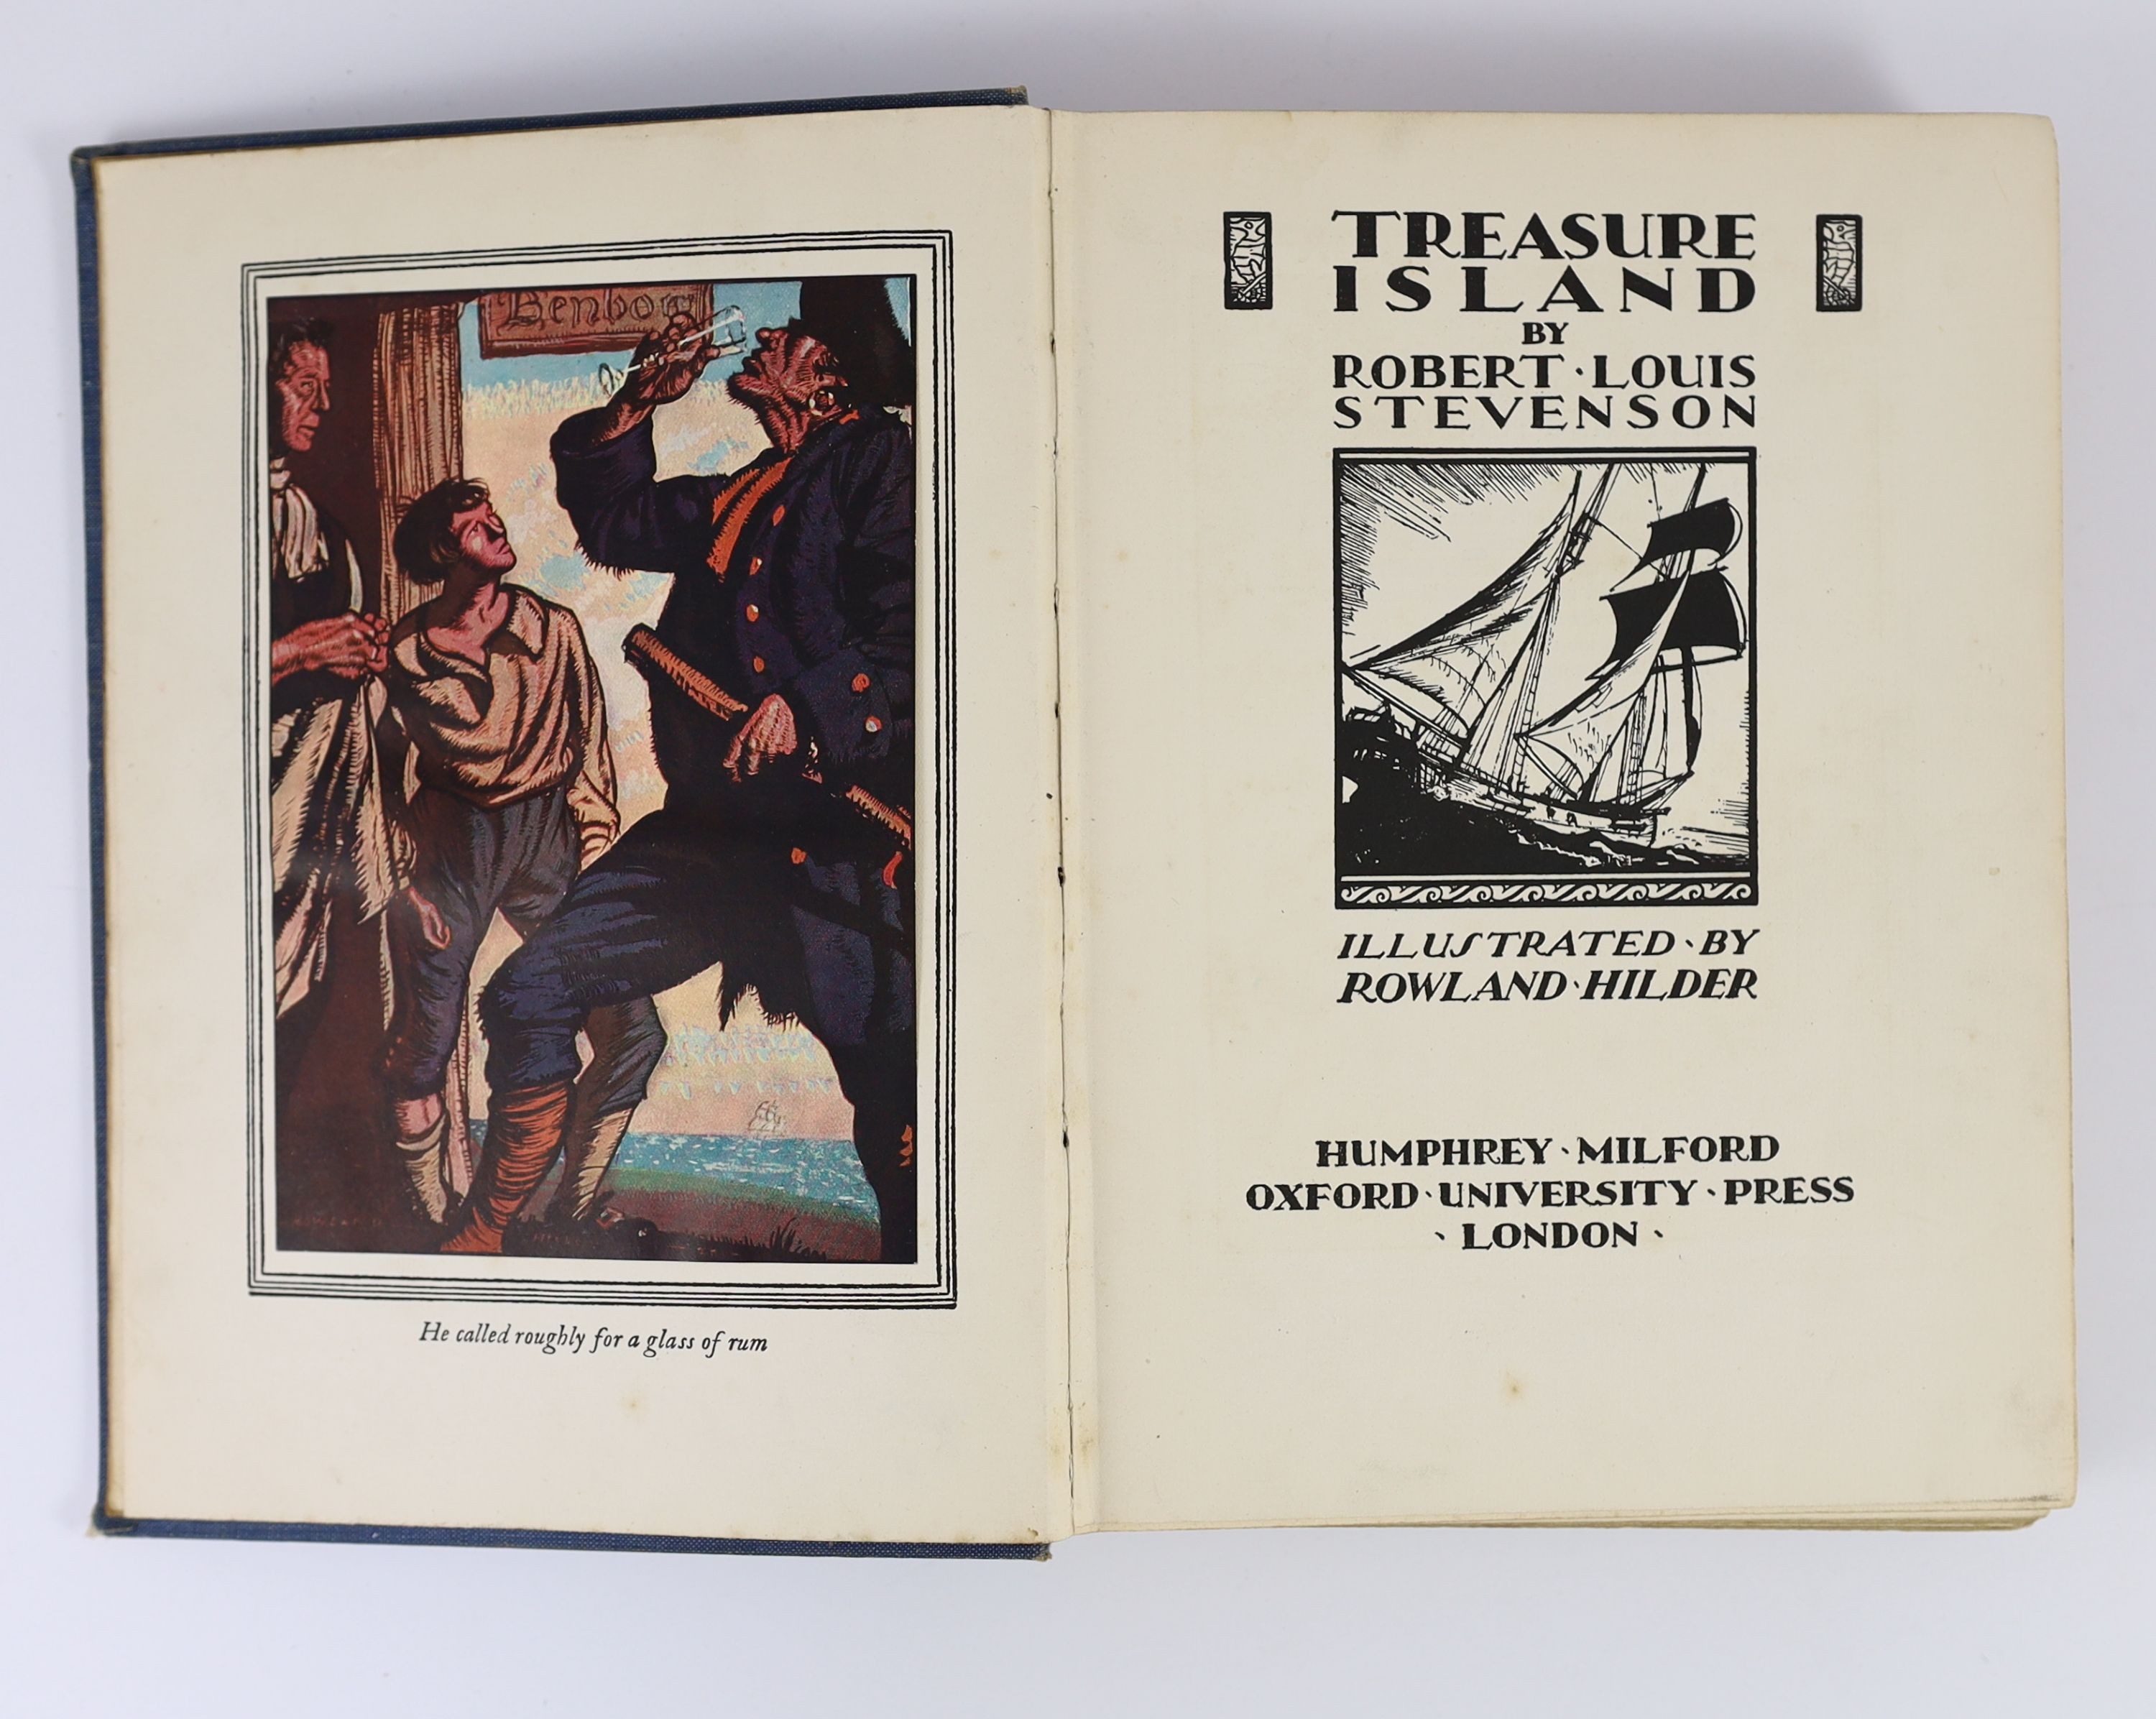 Stevenson, Robert Louis - 2 works, both illustrated with colour plates by Rowland Hilder - Treasure Island, 8vo, original pictorial cloth, London, 1929 and Kidnapped, 8vo, with d/j, London, 1938, in slip case. (2)